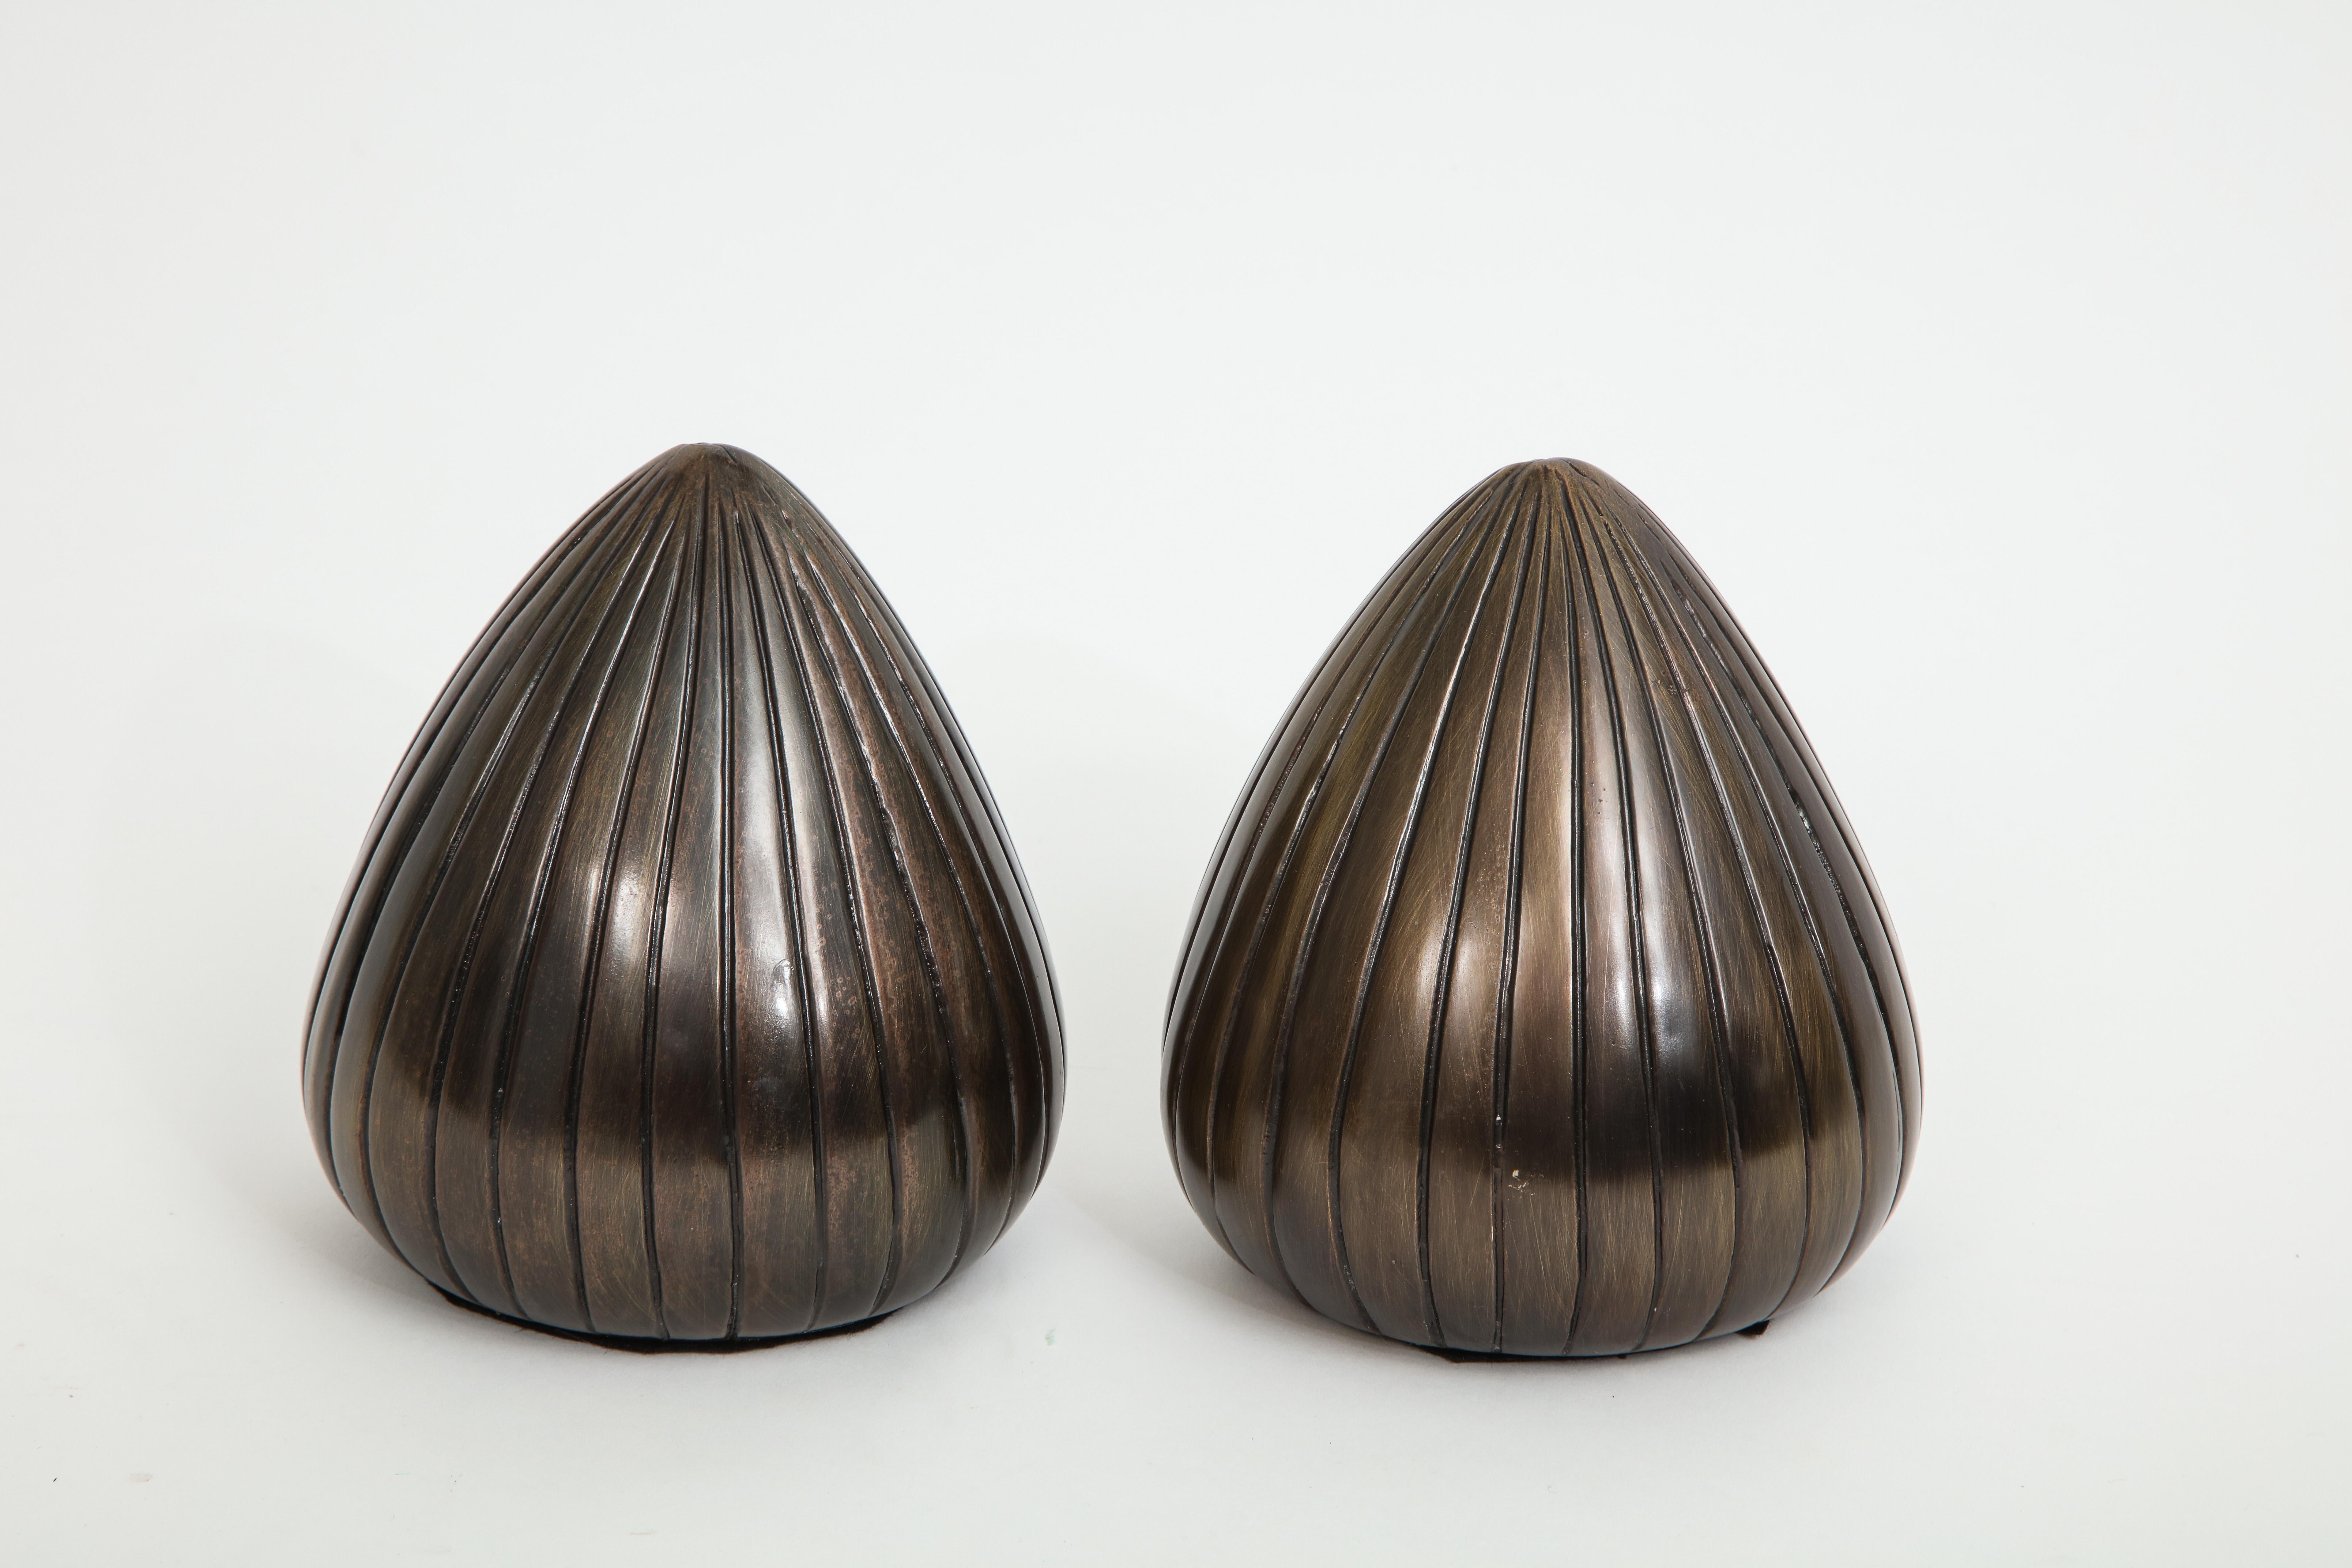 Pair of midcentury orb bookends in a gunmetal or bronze finish by Ben Seibel.